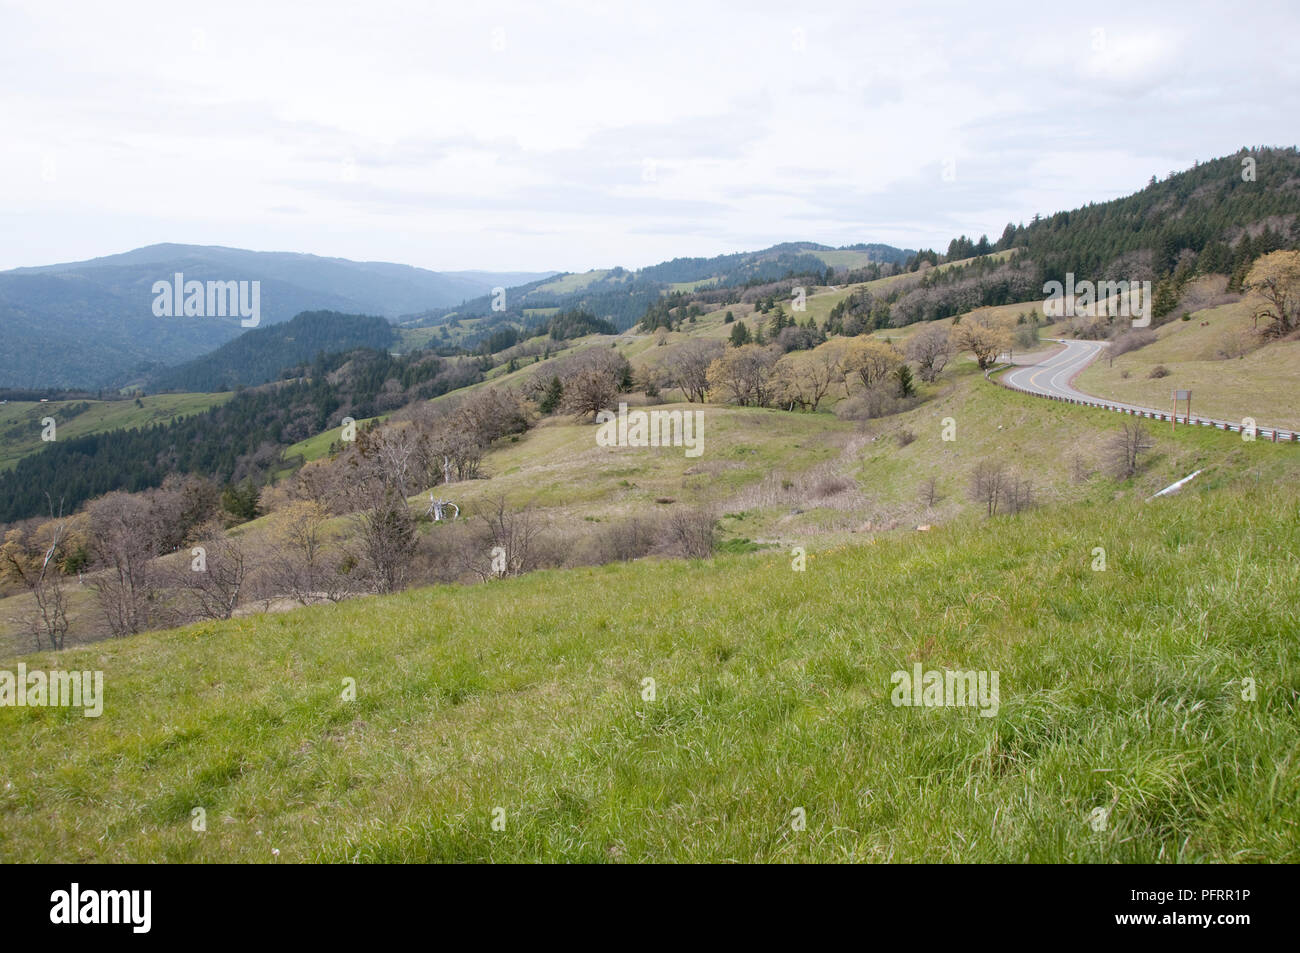 USA, California, Willow Creek, Vista Point from Berry Summit Stock Photo